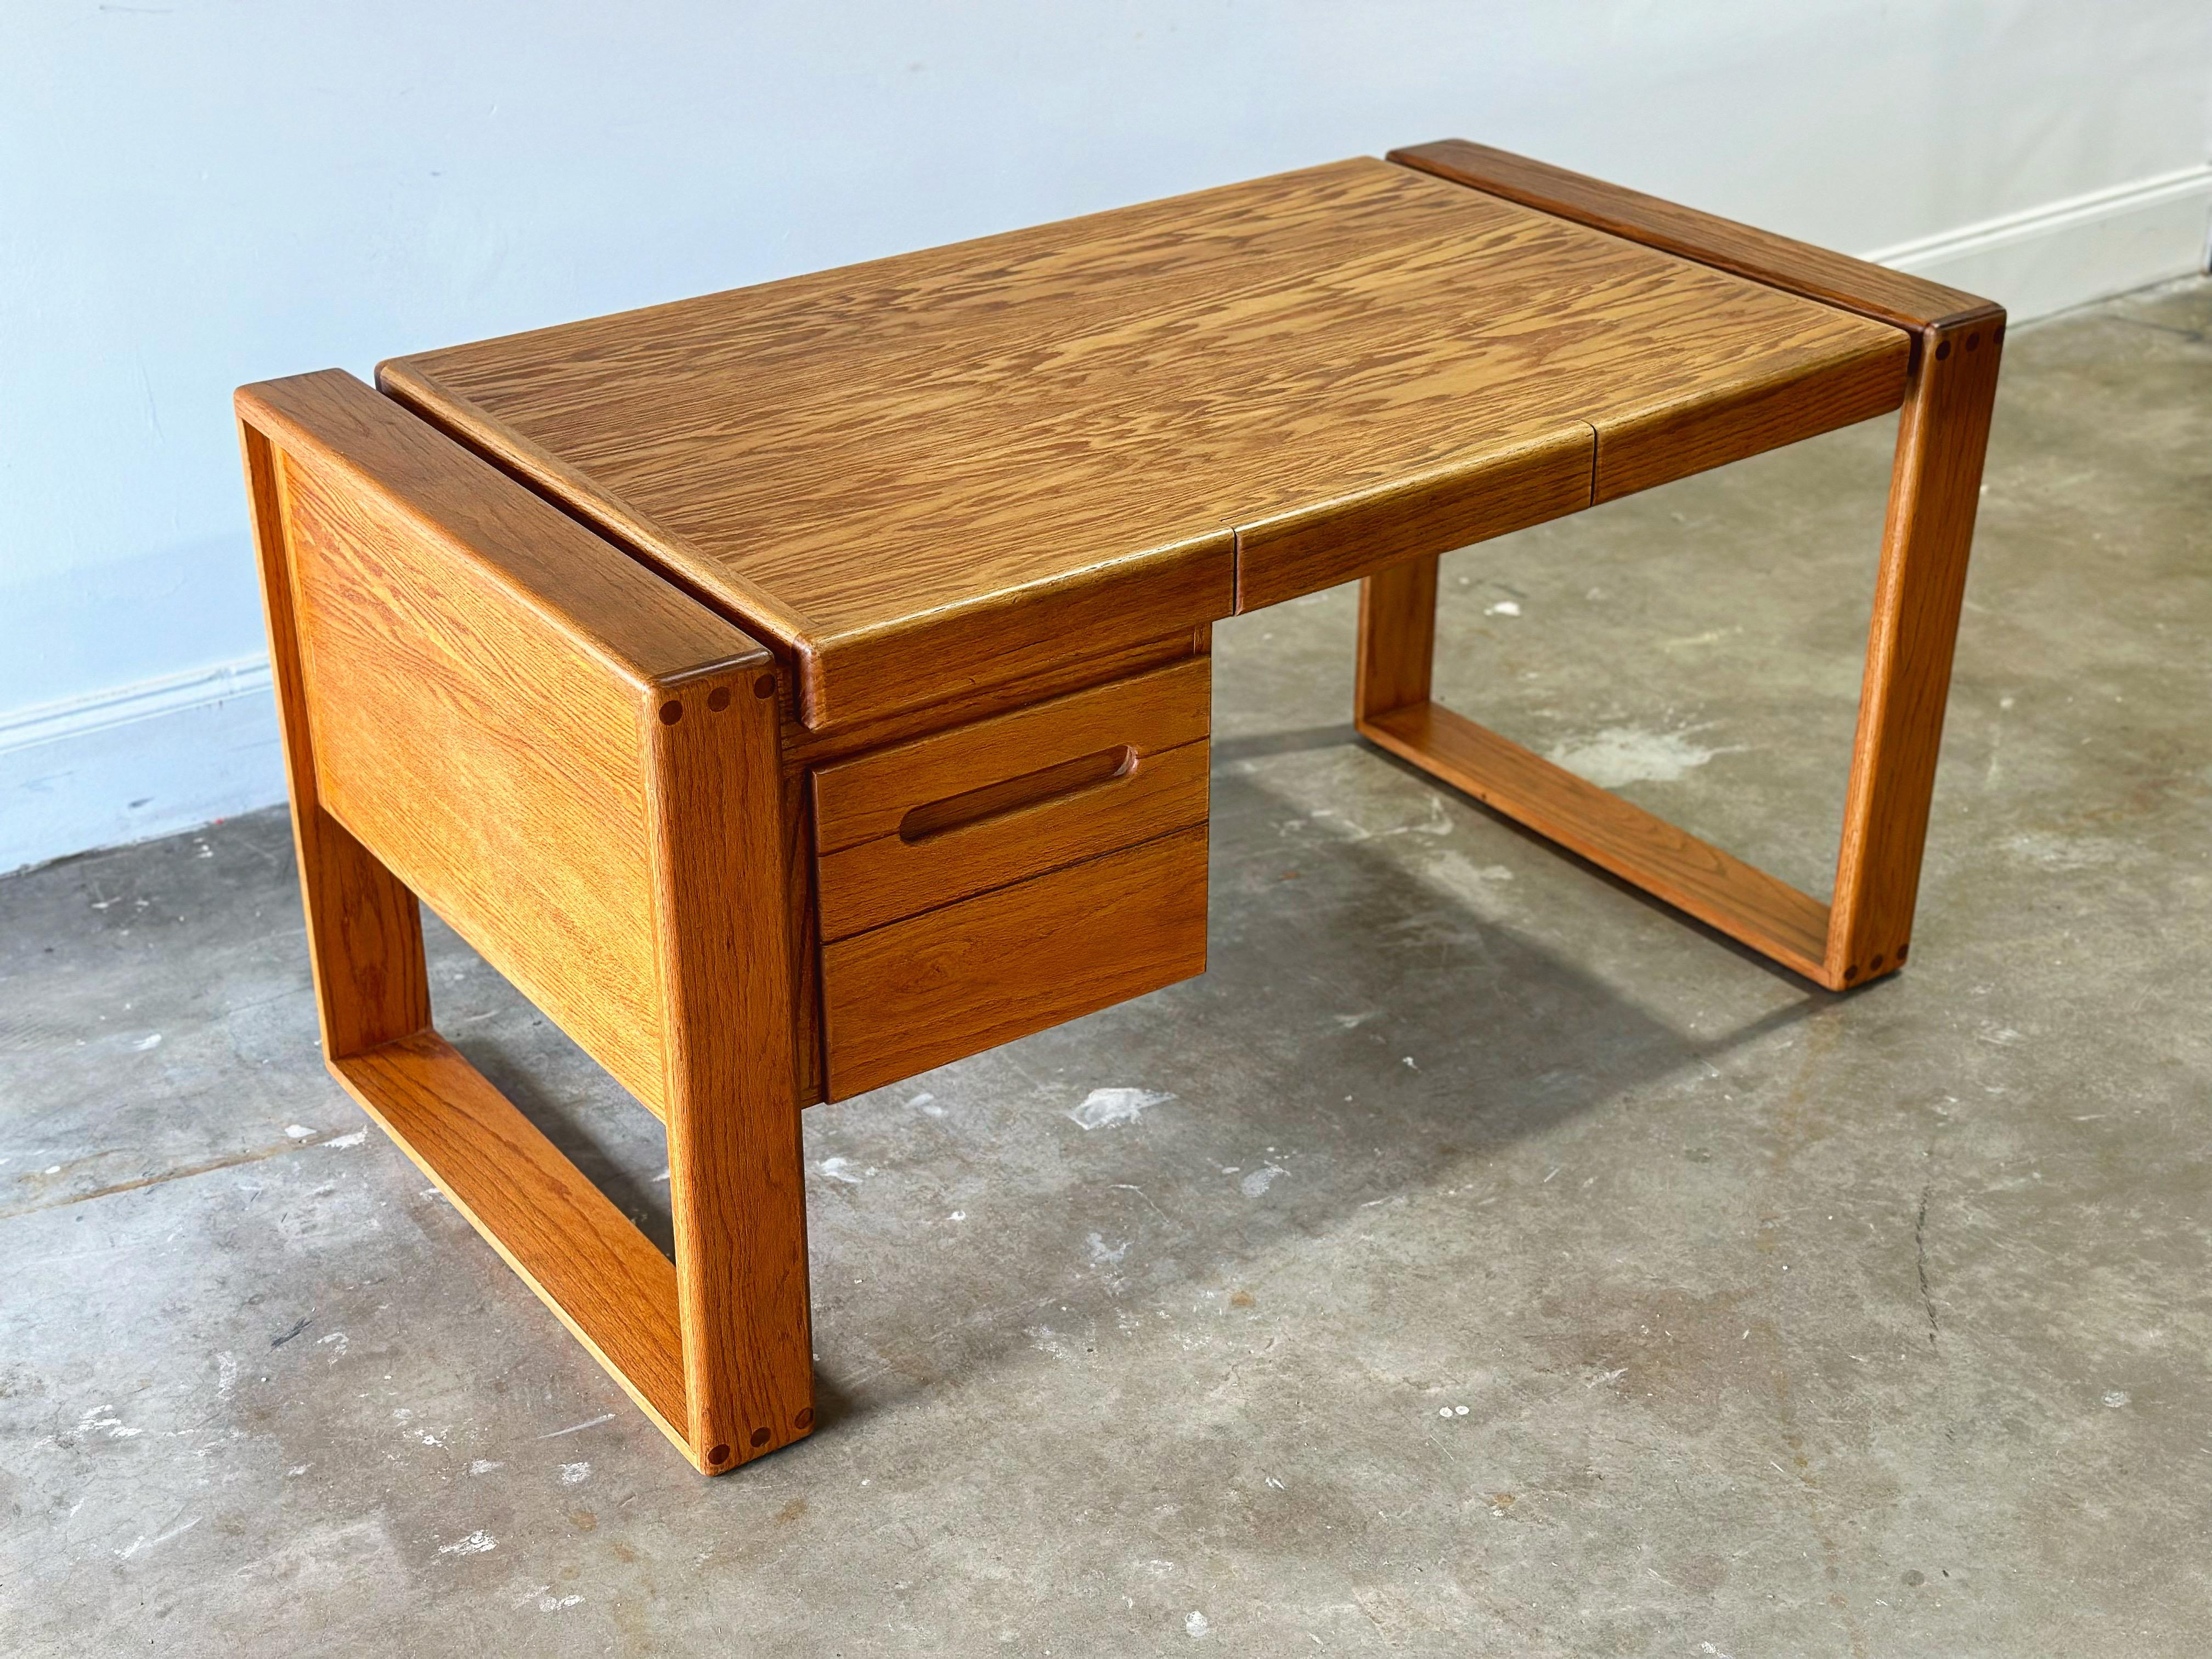 Lou Hodges handcrafted solid oak desk for California Design Group, signed and date 1980. This piece has been professionally restored and attended to by our team - it is in excellent condition and is ready for use.

.